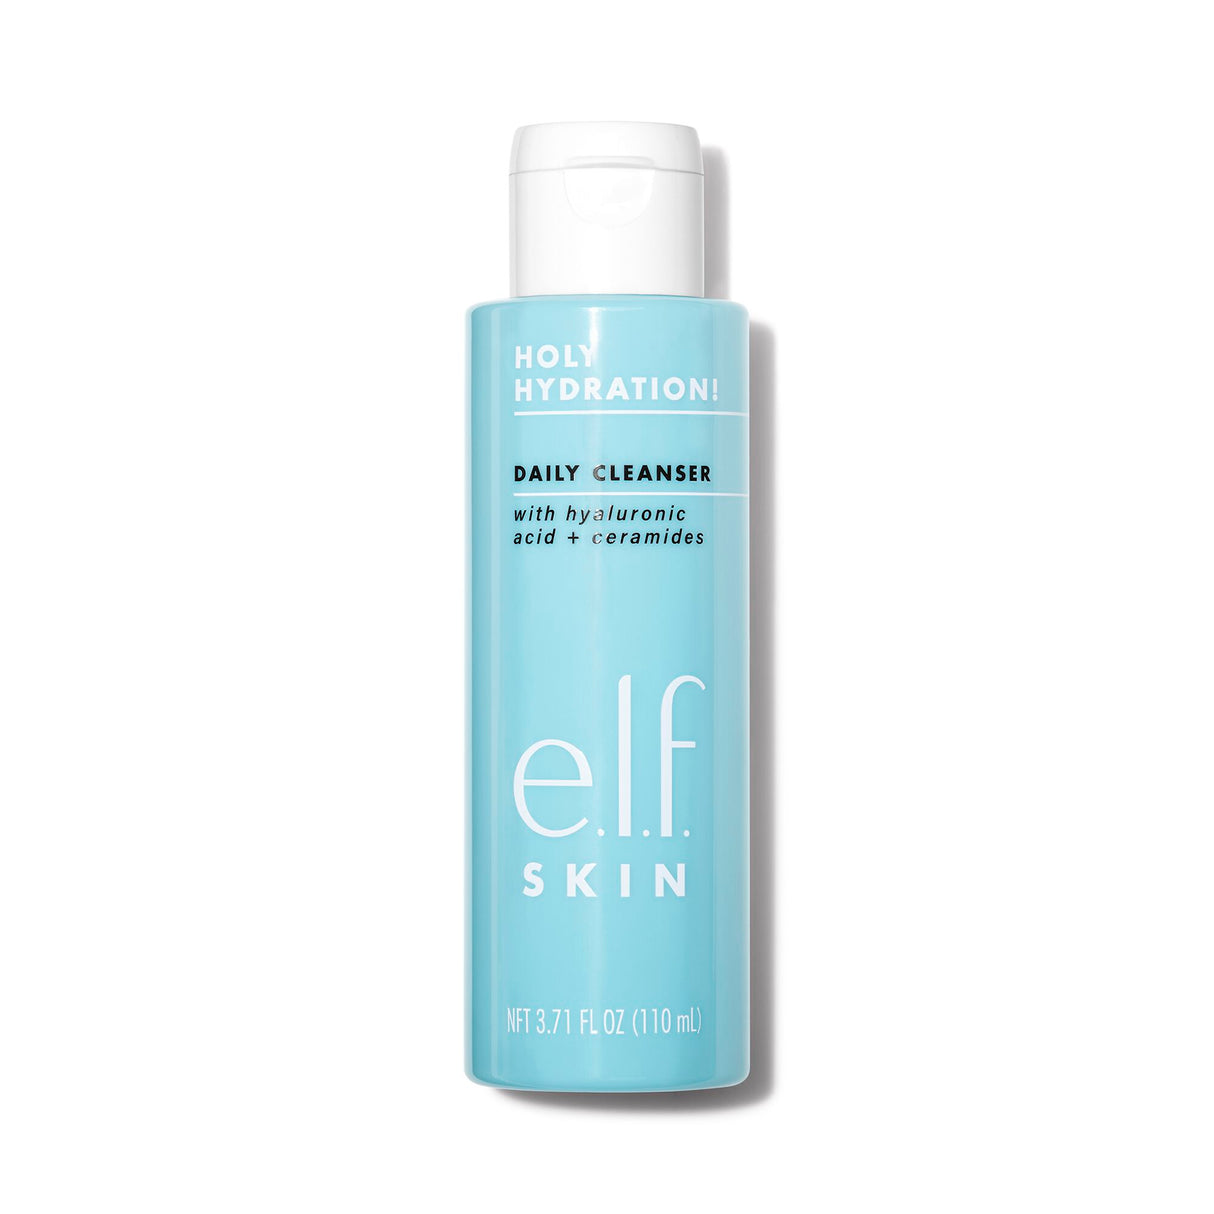 e.l.f. Skin Holy Hydration Daily Cleanser